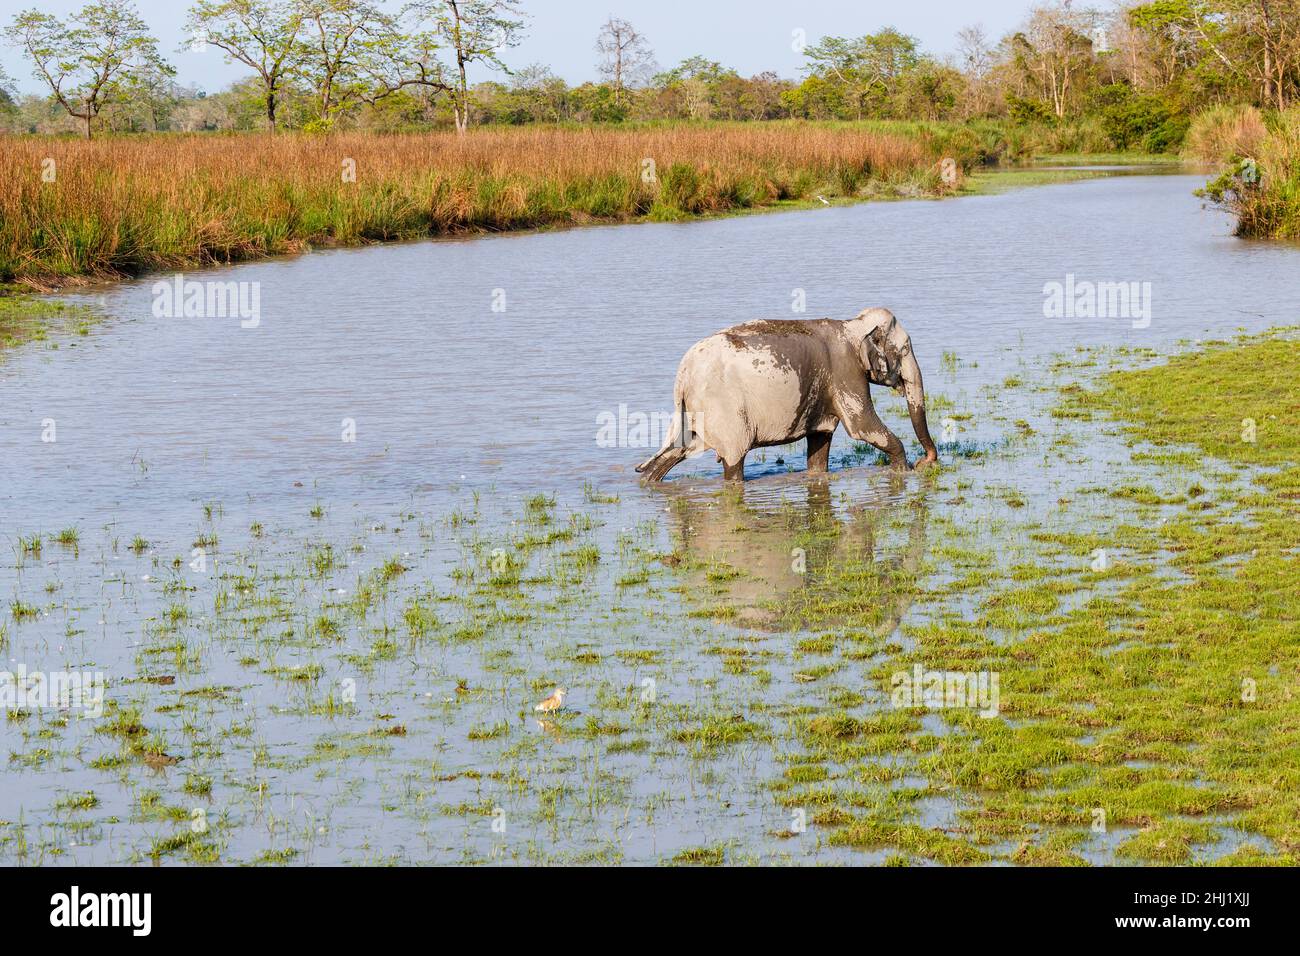 An Indian elephant (Elephas maximus indicus) crosses a river in Kaziranga National Park, Assam, north-eastern India Stock Photo